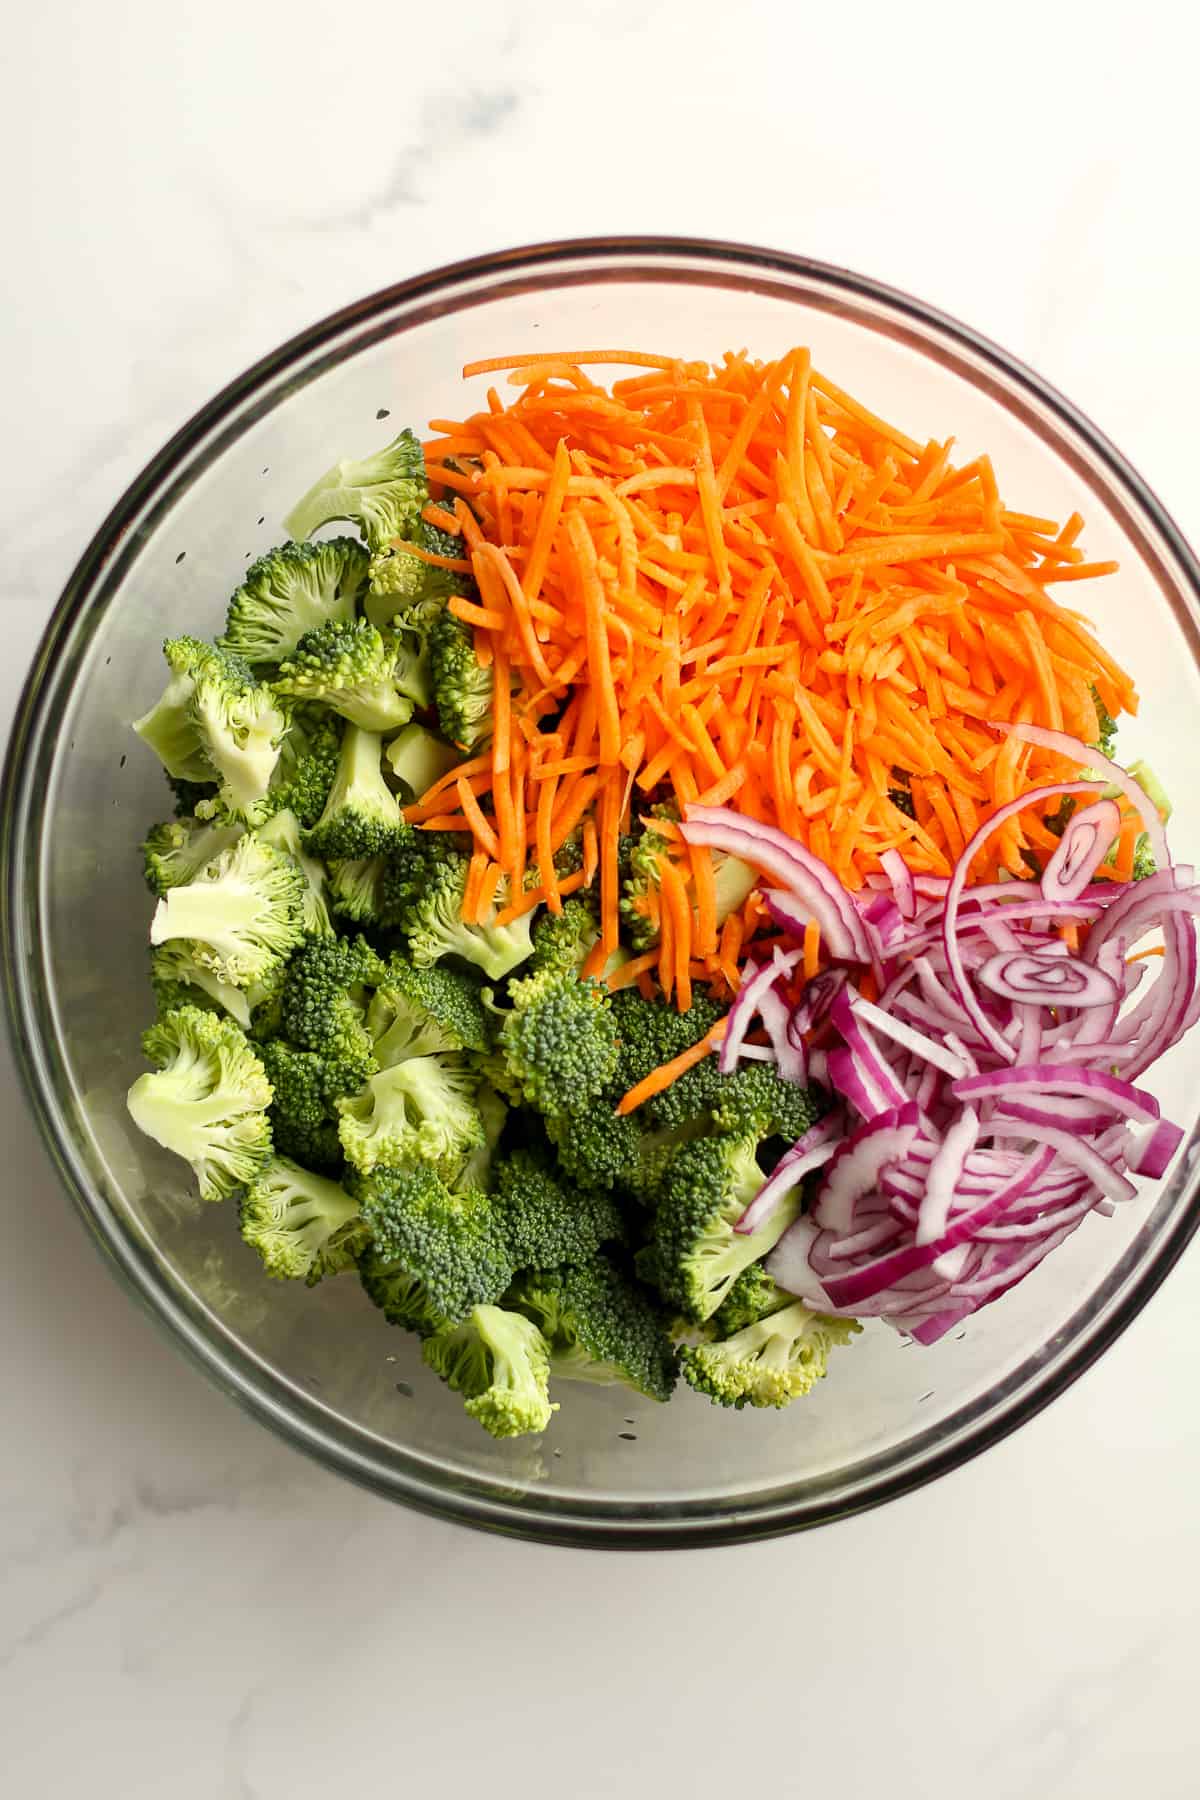 A bowl of the broccoli florets, shredded carrots, and sliced red onions.